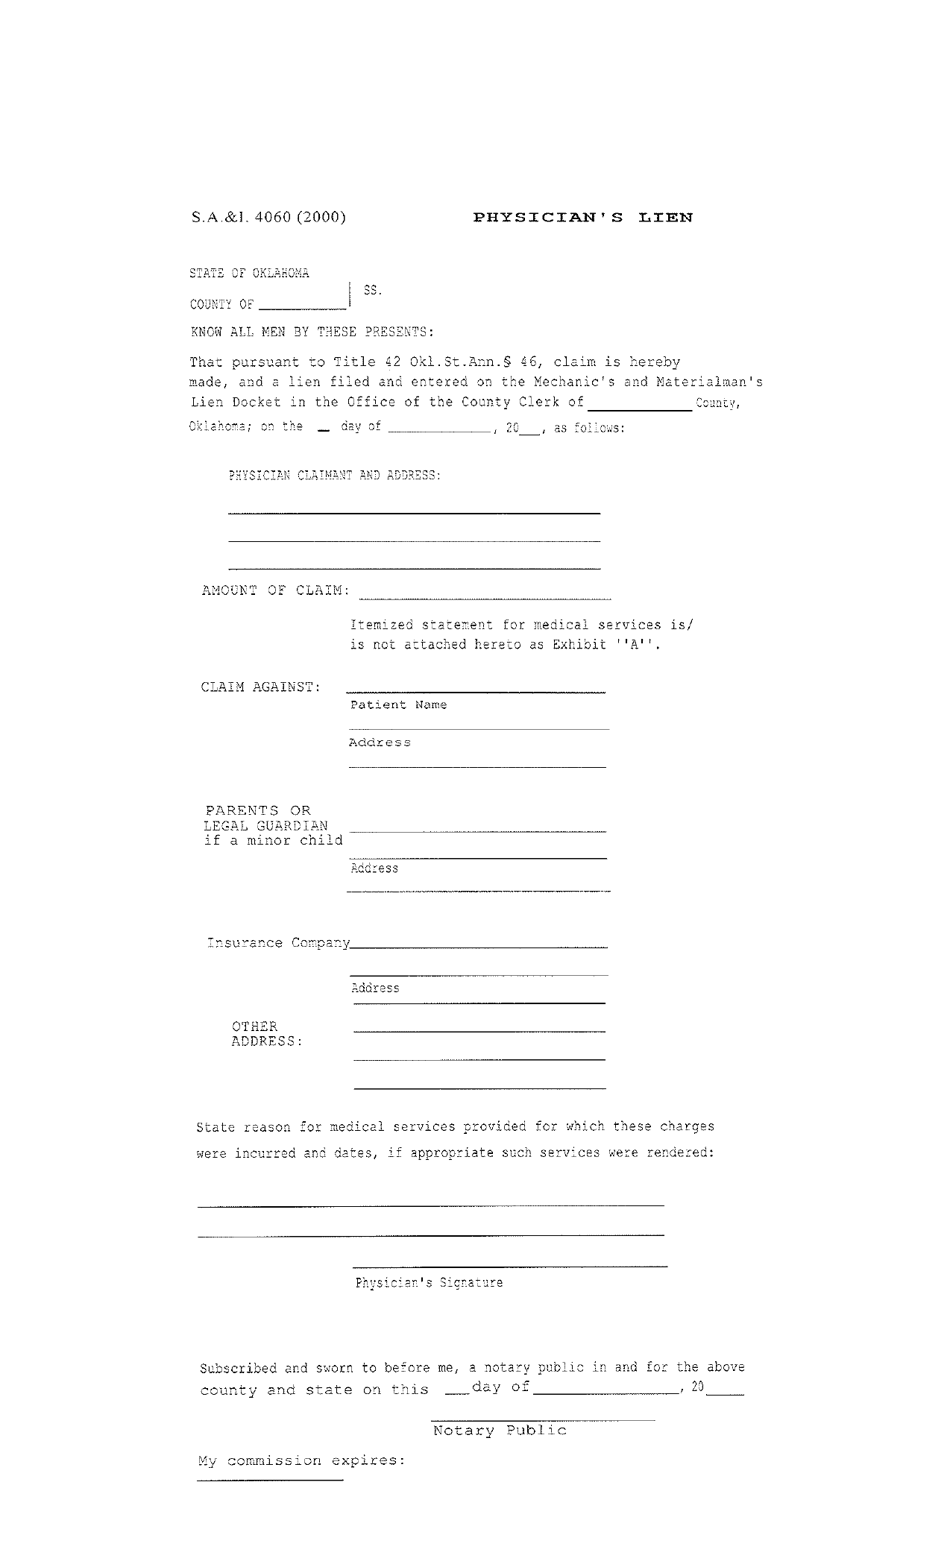 Form S.A. I.4060 Physicians Lien - Oklahoma, Page 1